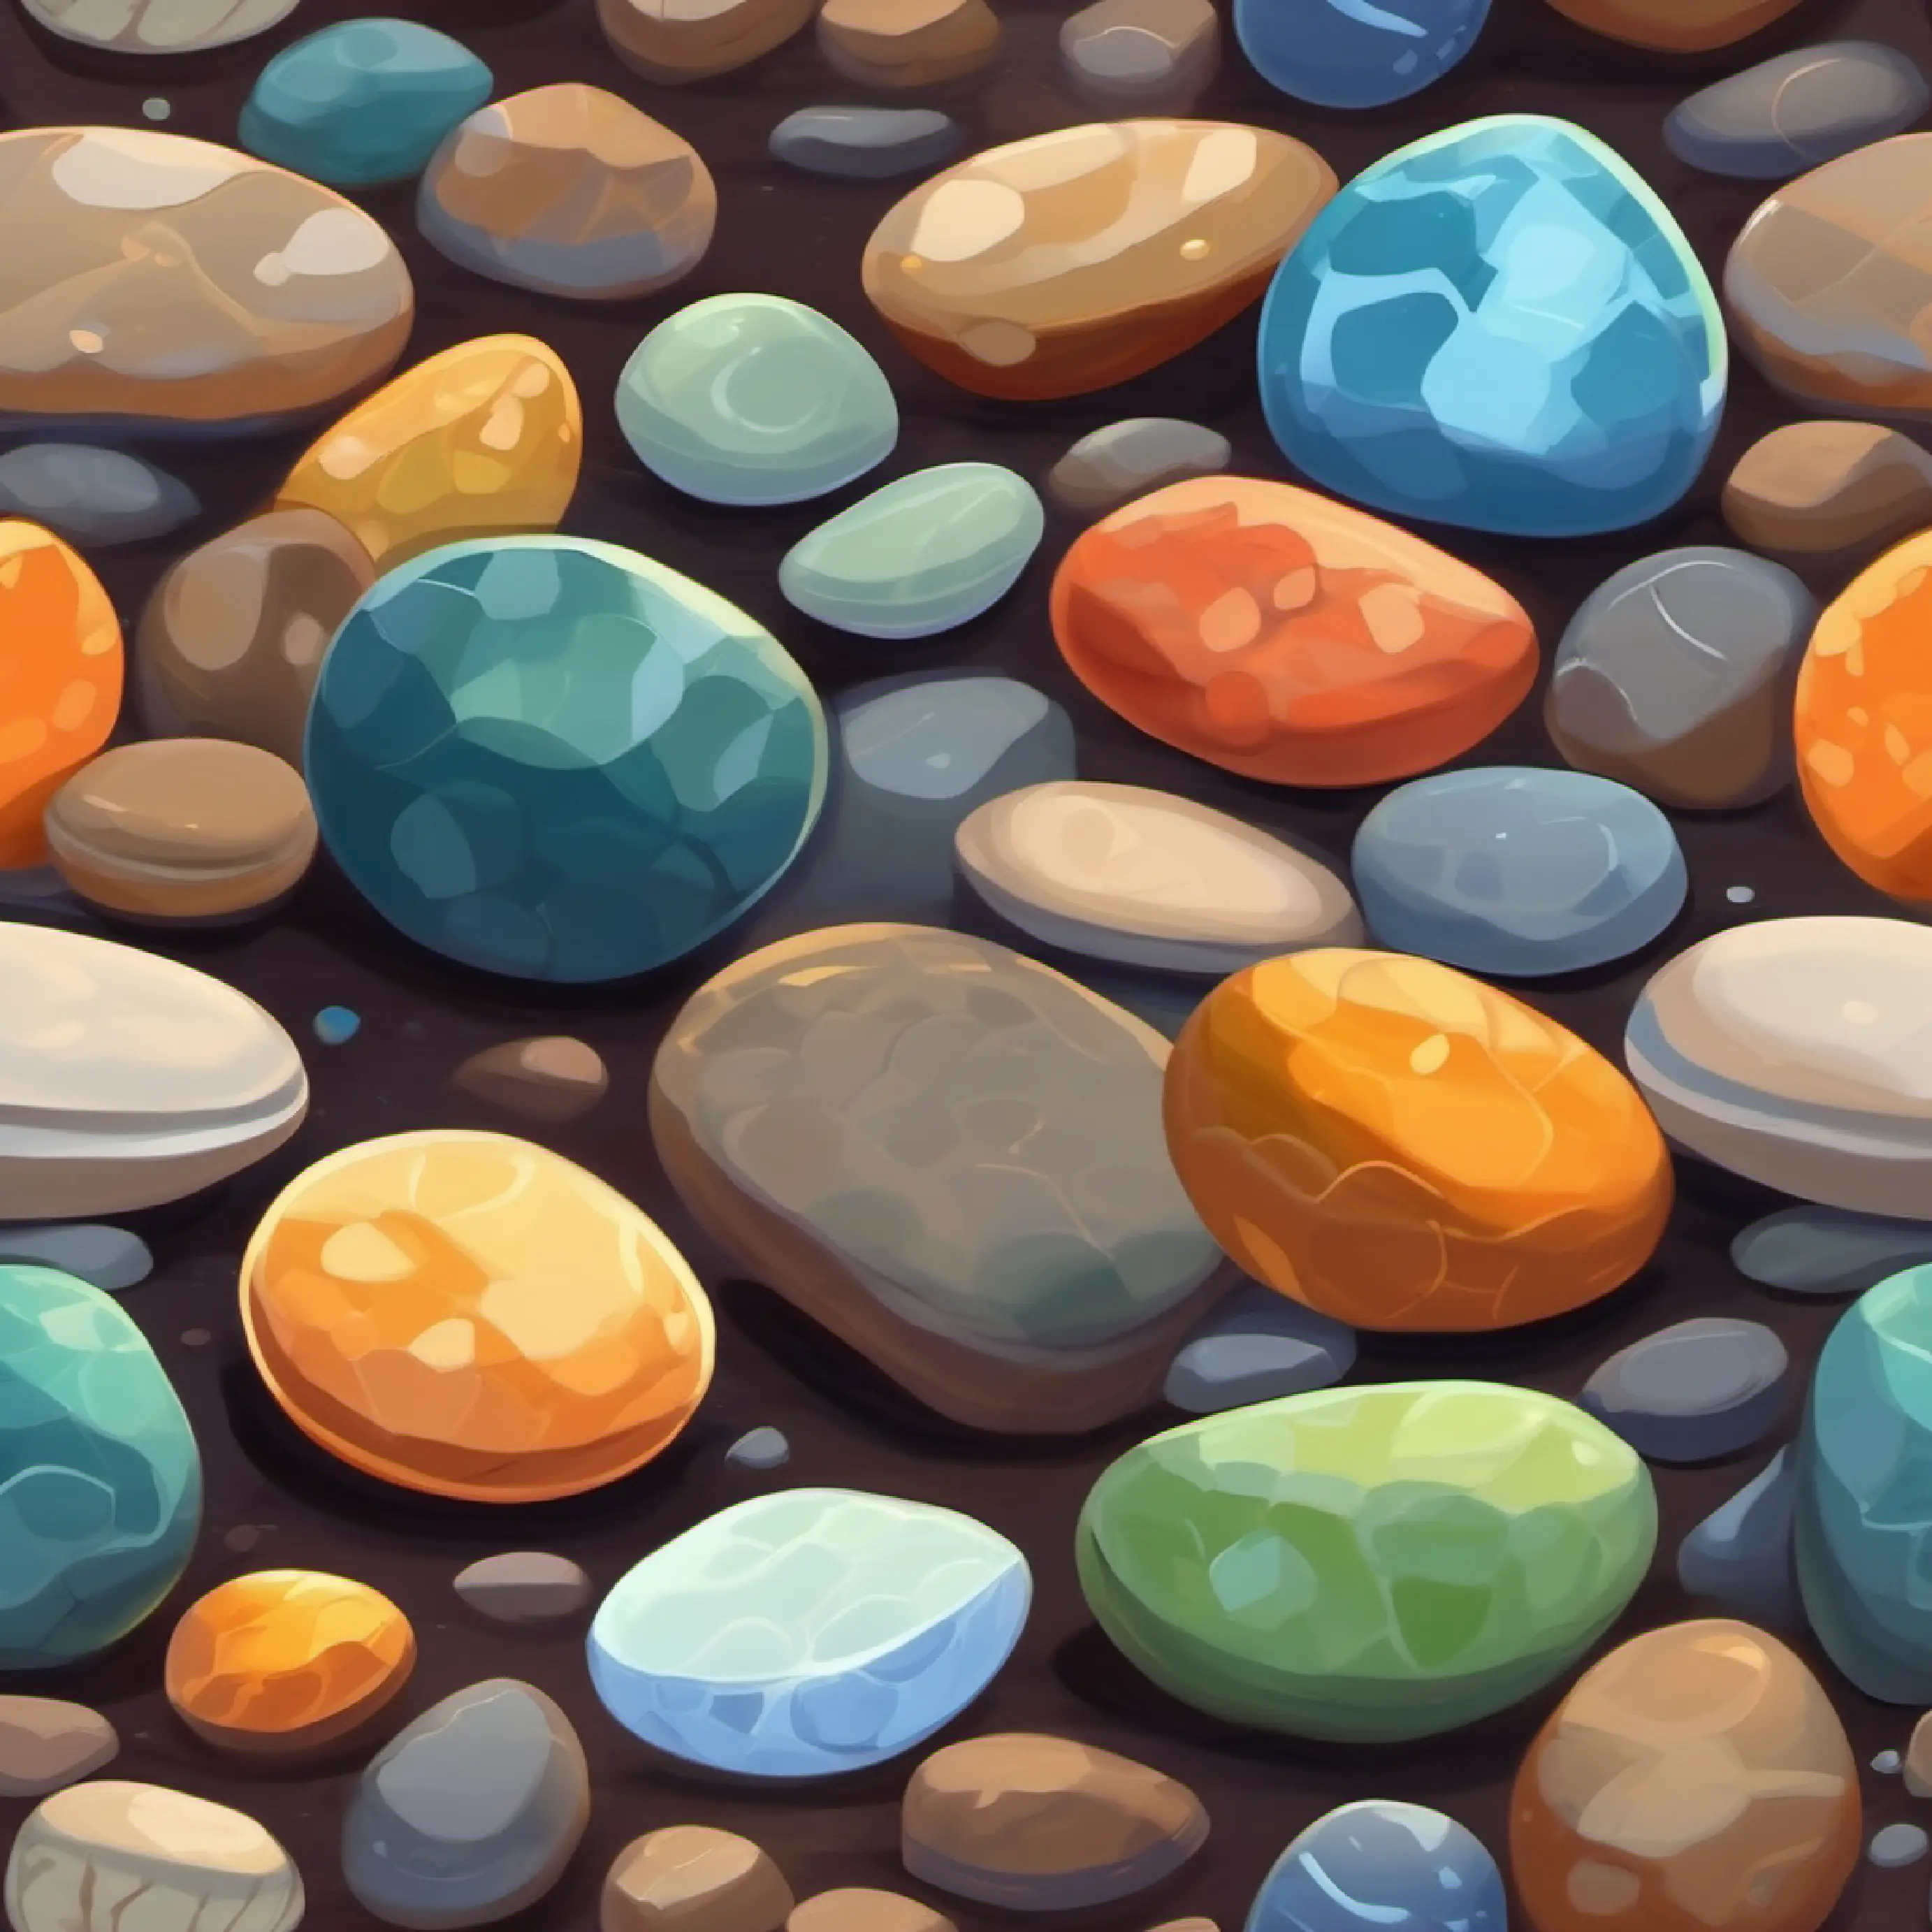 They see eight pebbles and decide to collect them.